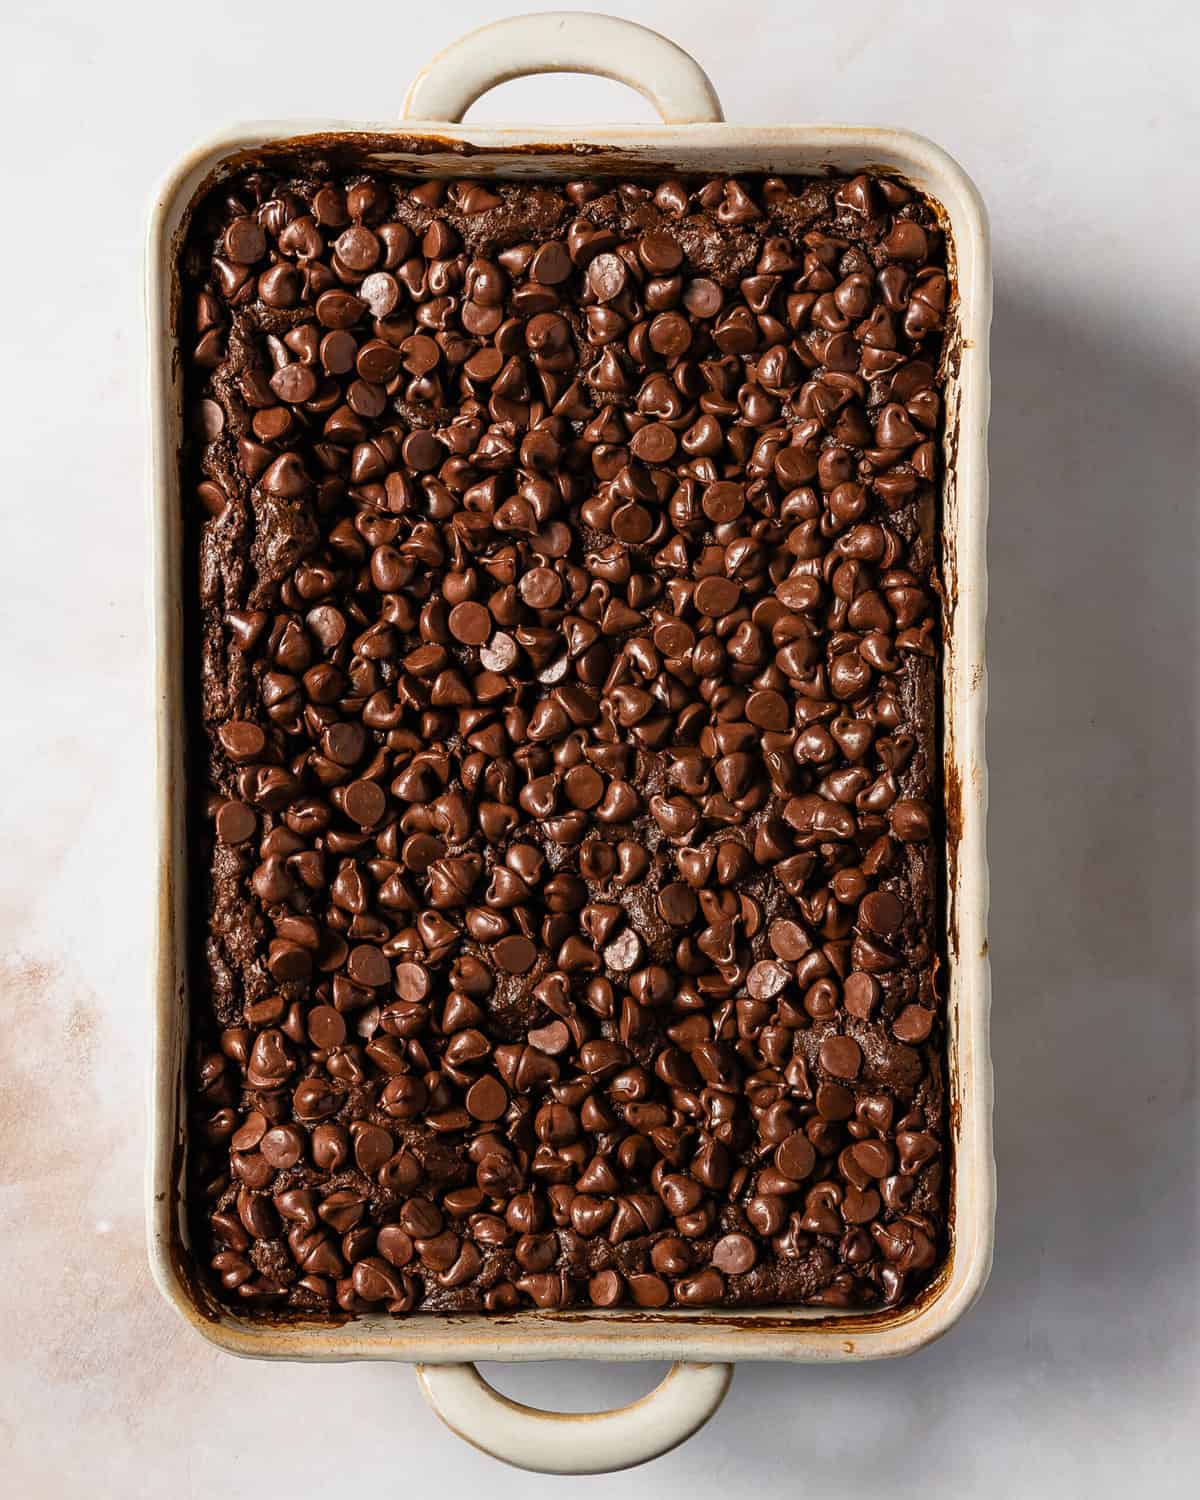 Chocolate dump cake is a quick, easy to make and rich chocolate dessert. This chocolate dump cake recipe is made from moist chocolate cake mix, creamy chocolate pudding and sweet chocolate chips. Top this decadent chocolate pudding dump cake with cold vanilla ice cream for the perfect dessert.